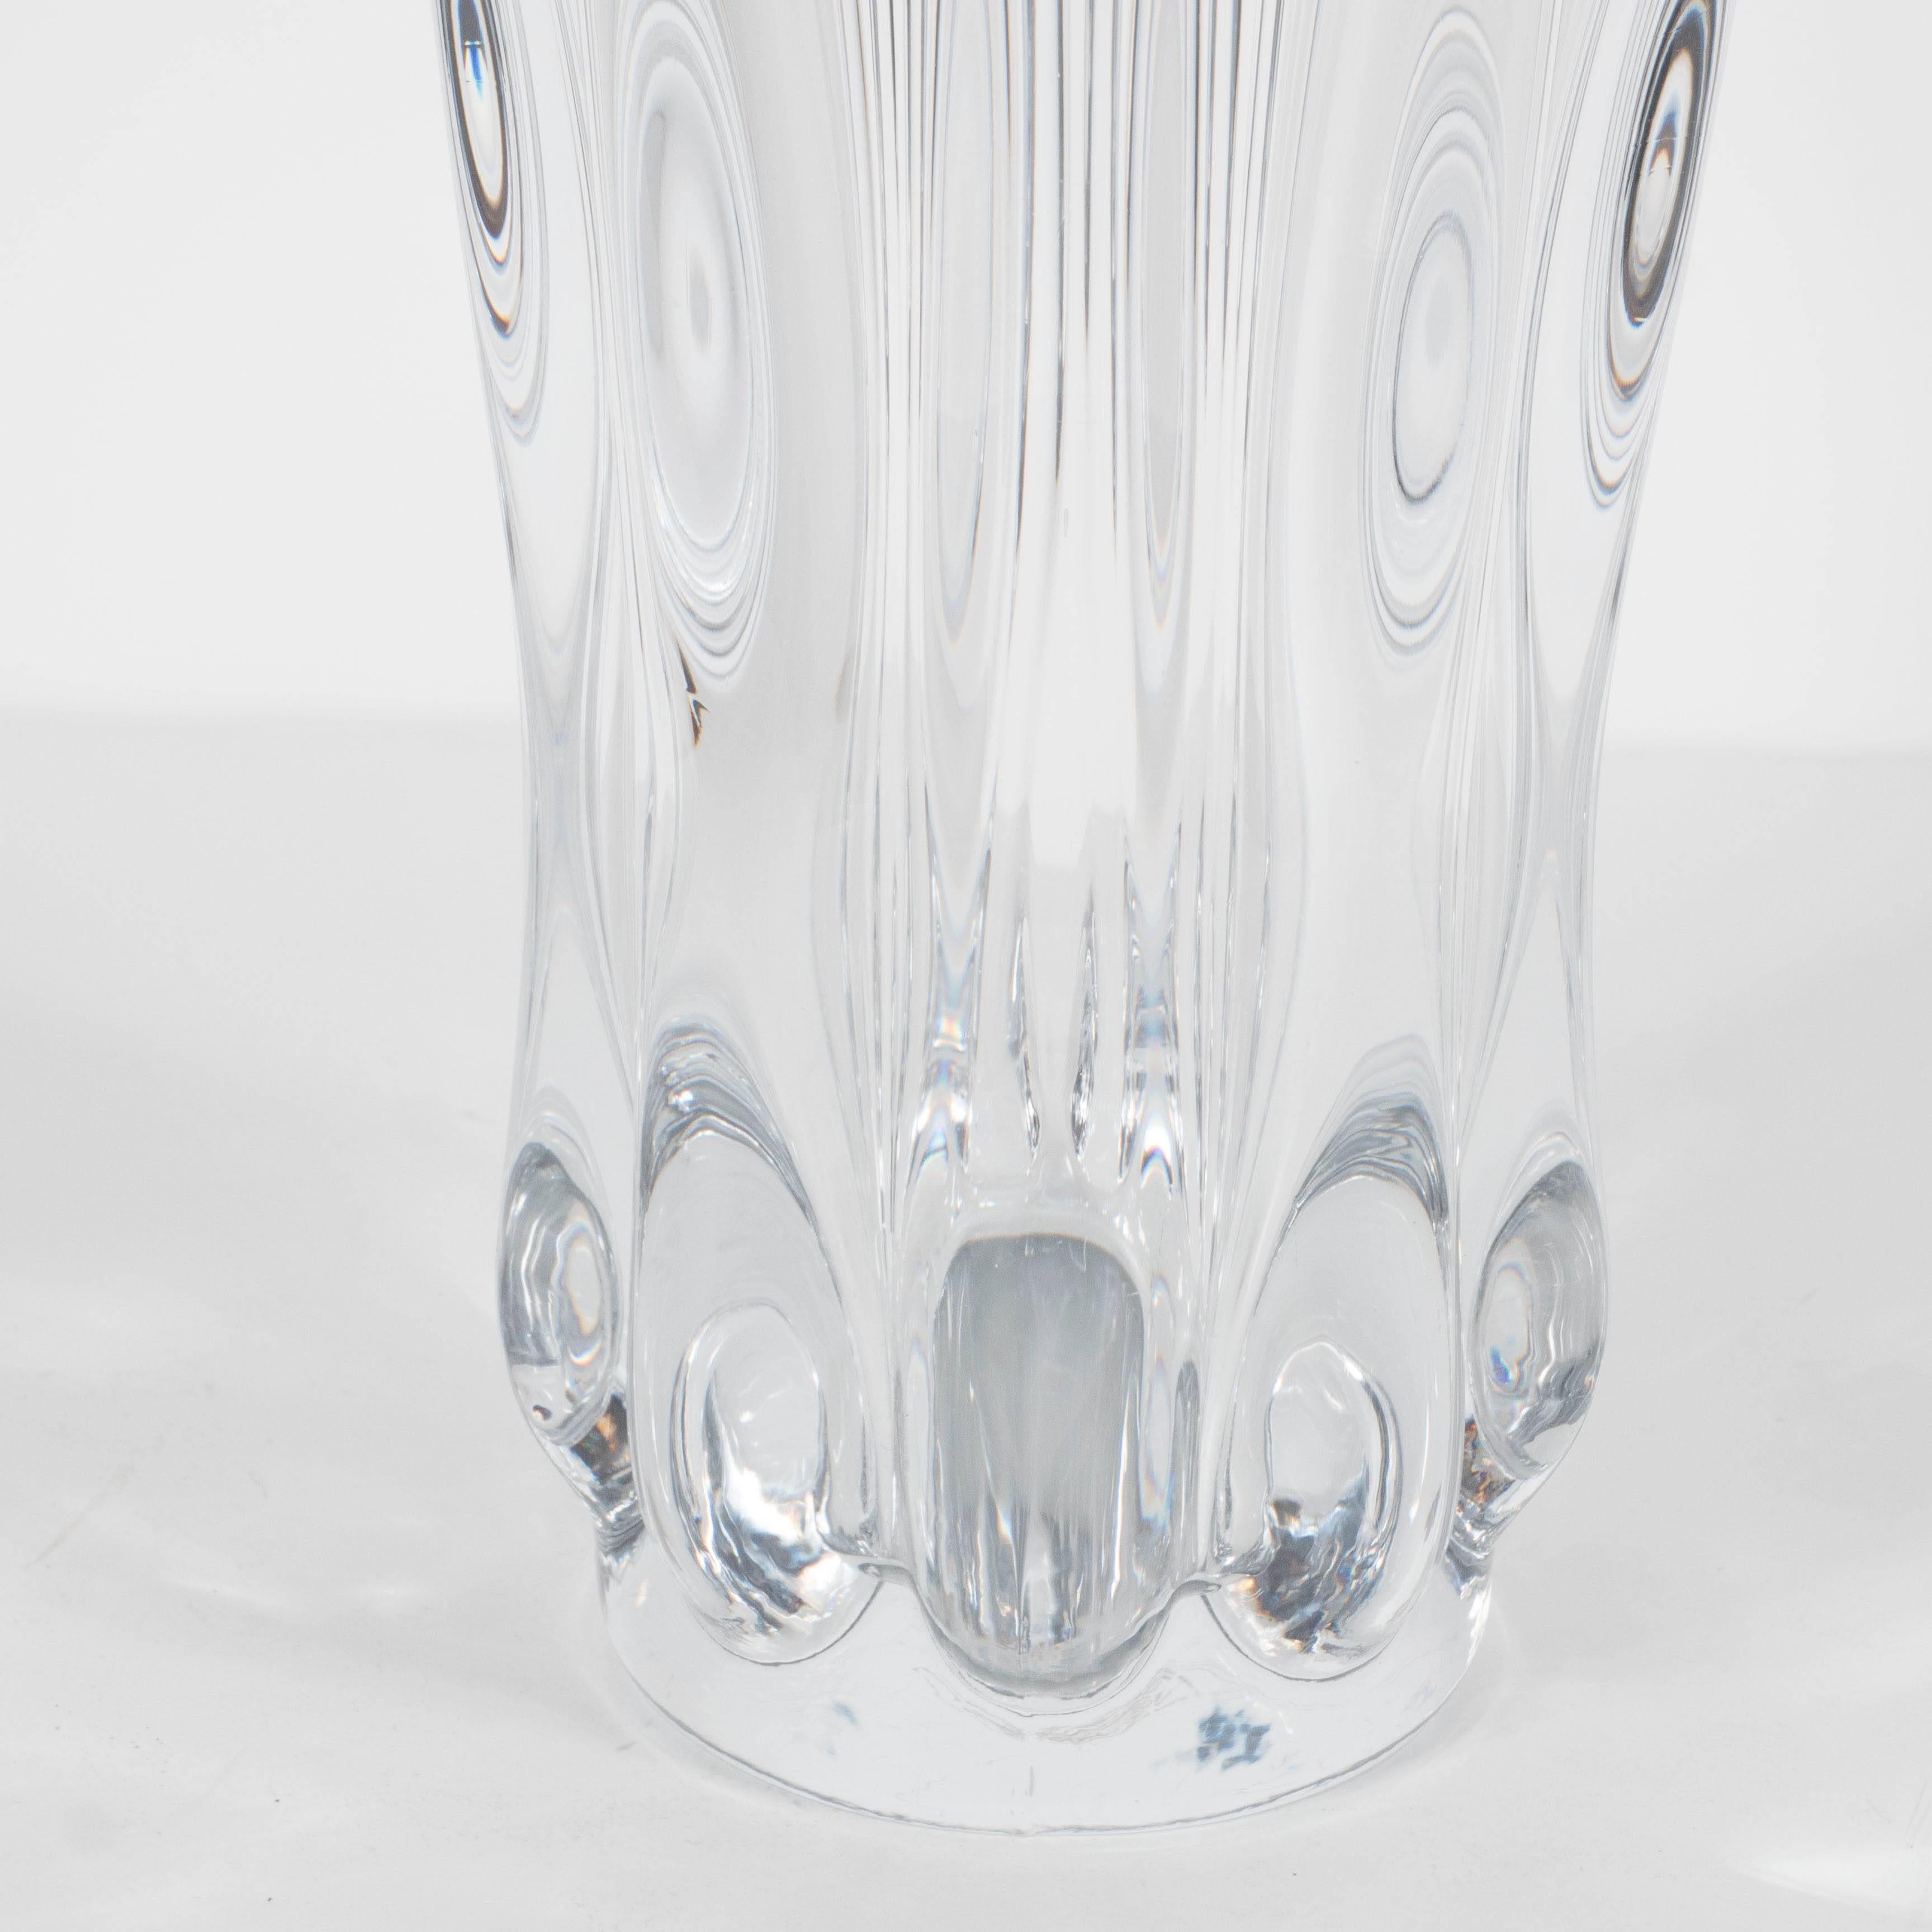 This stunning handblown crystal vase features a stylized floriform design. It also has an acid etched factory mark 